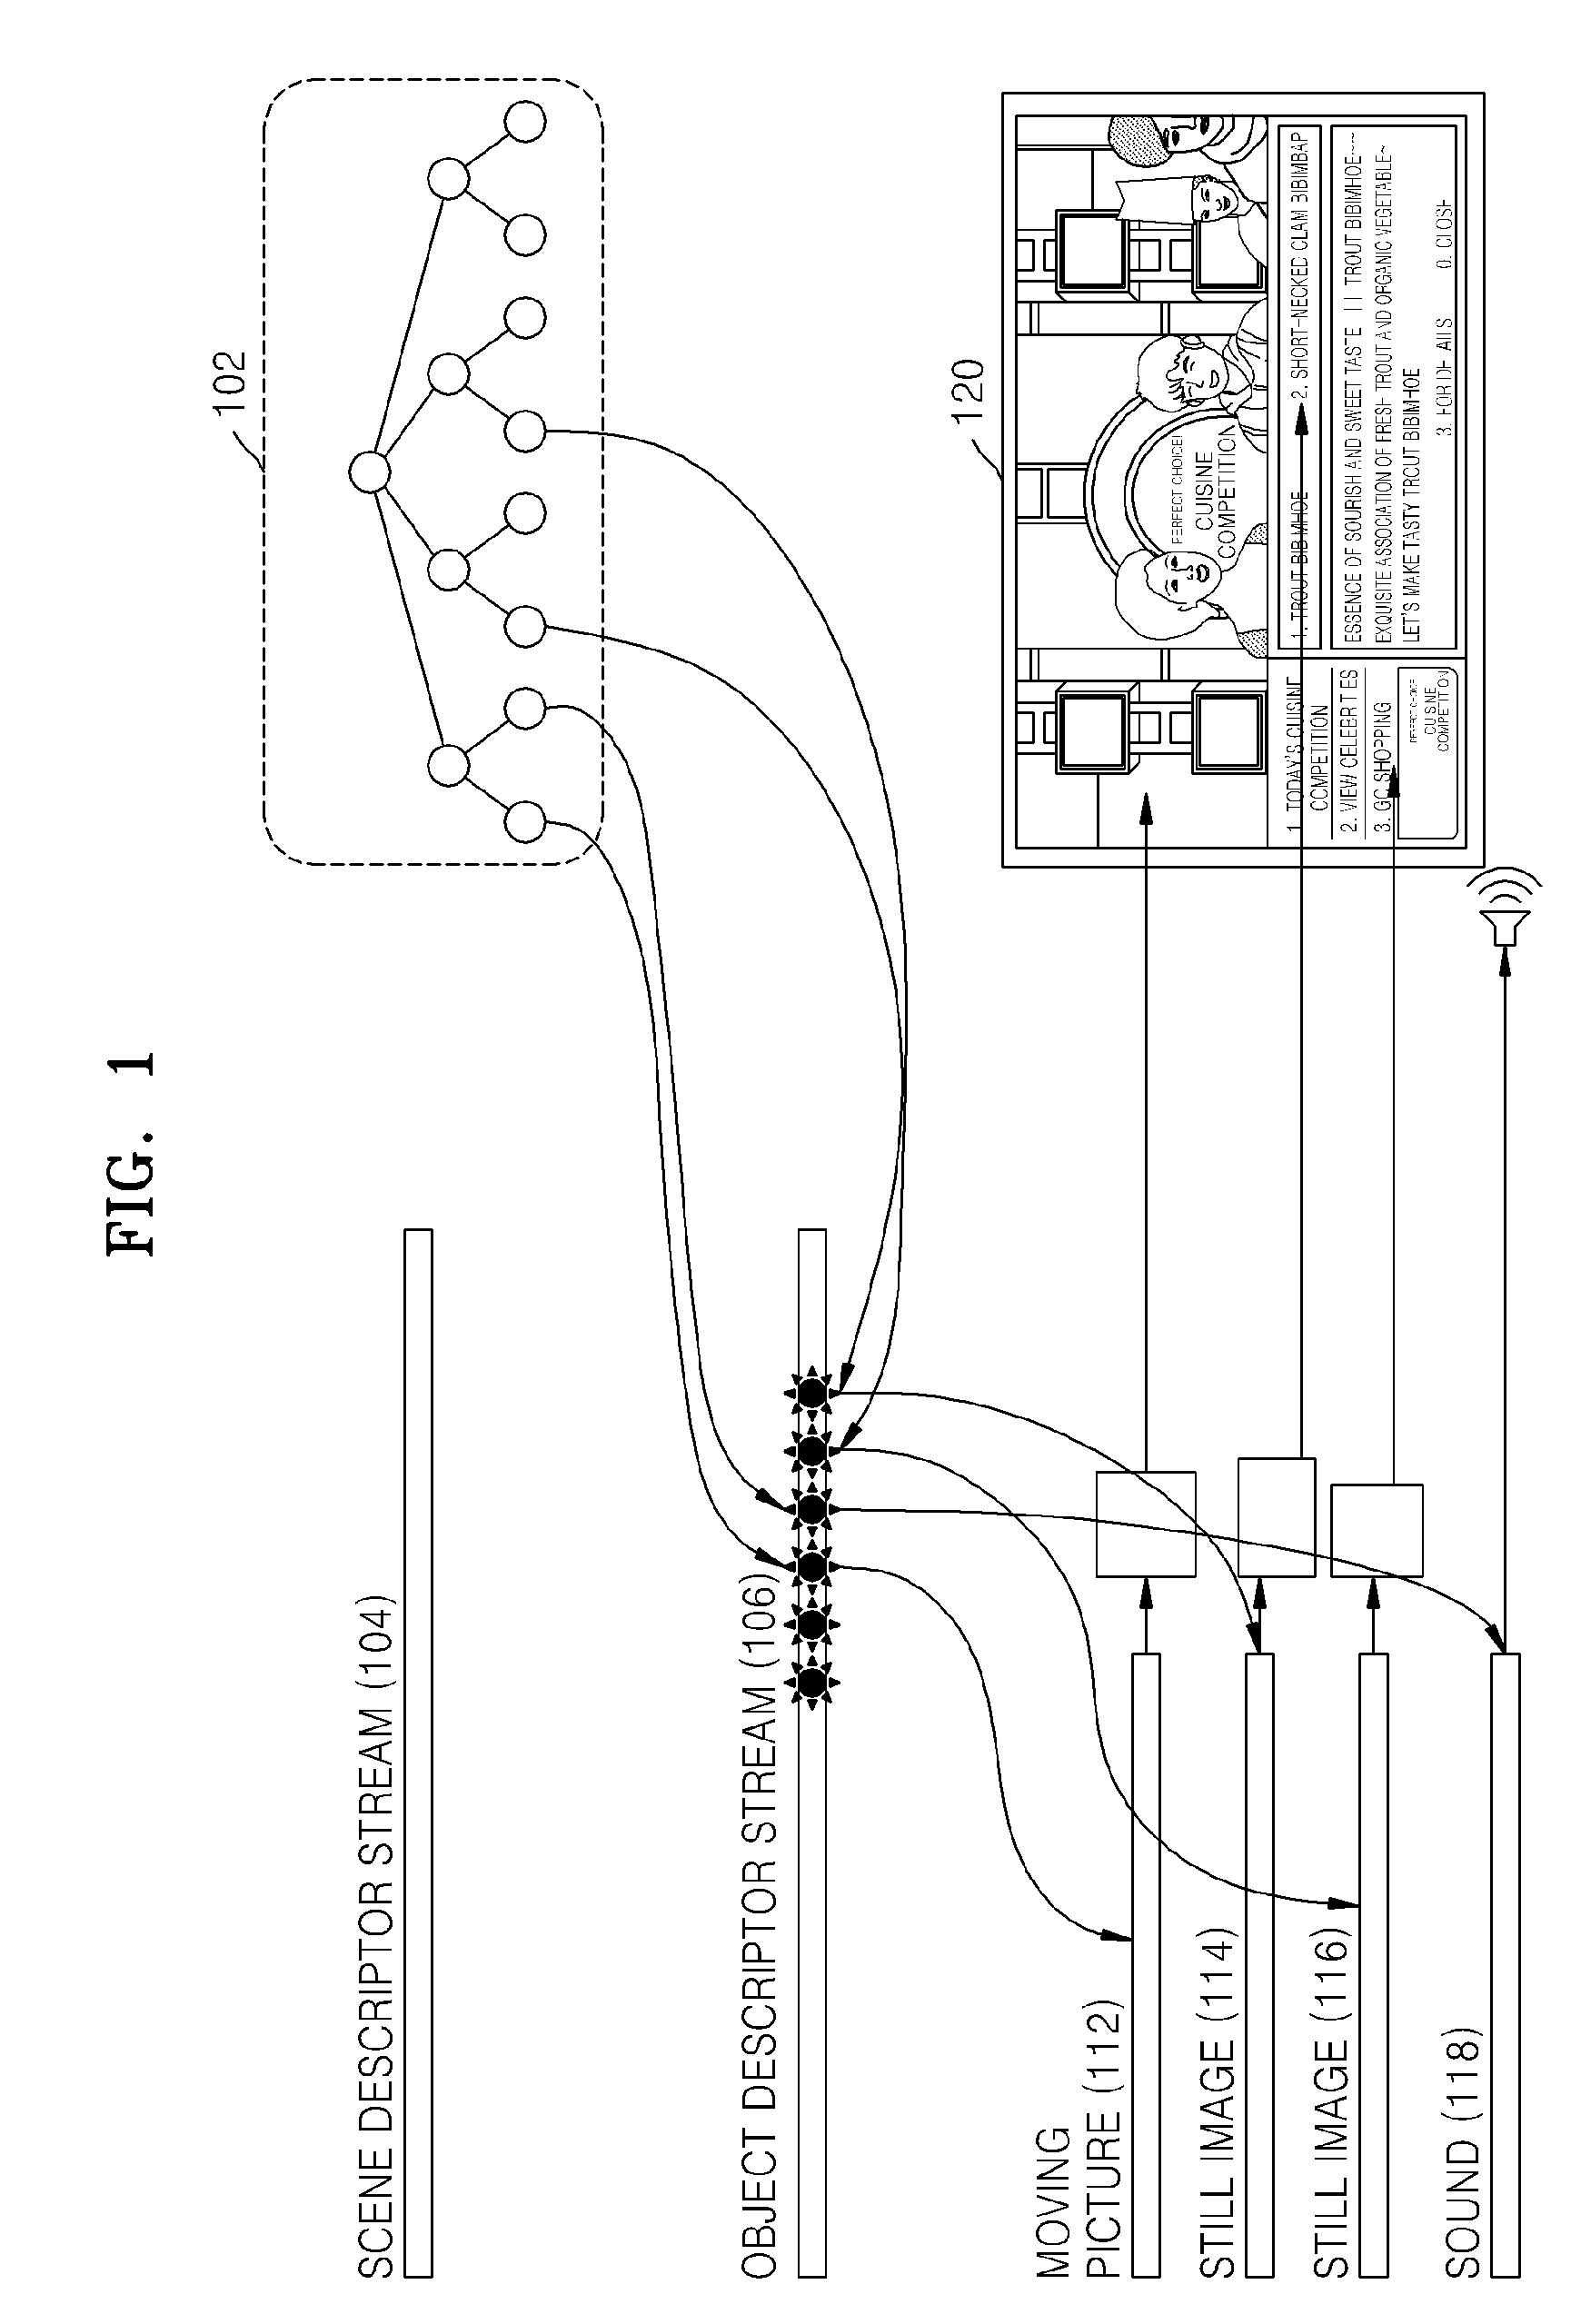 Method and apparatus for generating media-exchangeable multimedia data, and method and apparatus for reconstructing media-exchangeable multimedia data